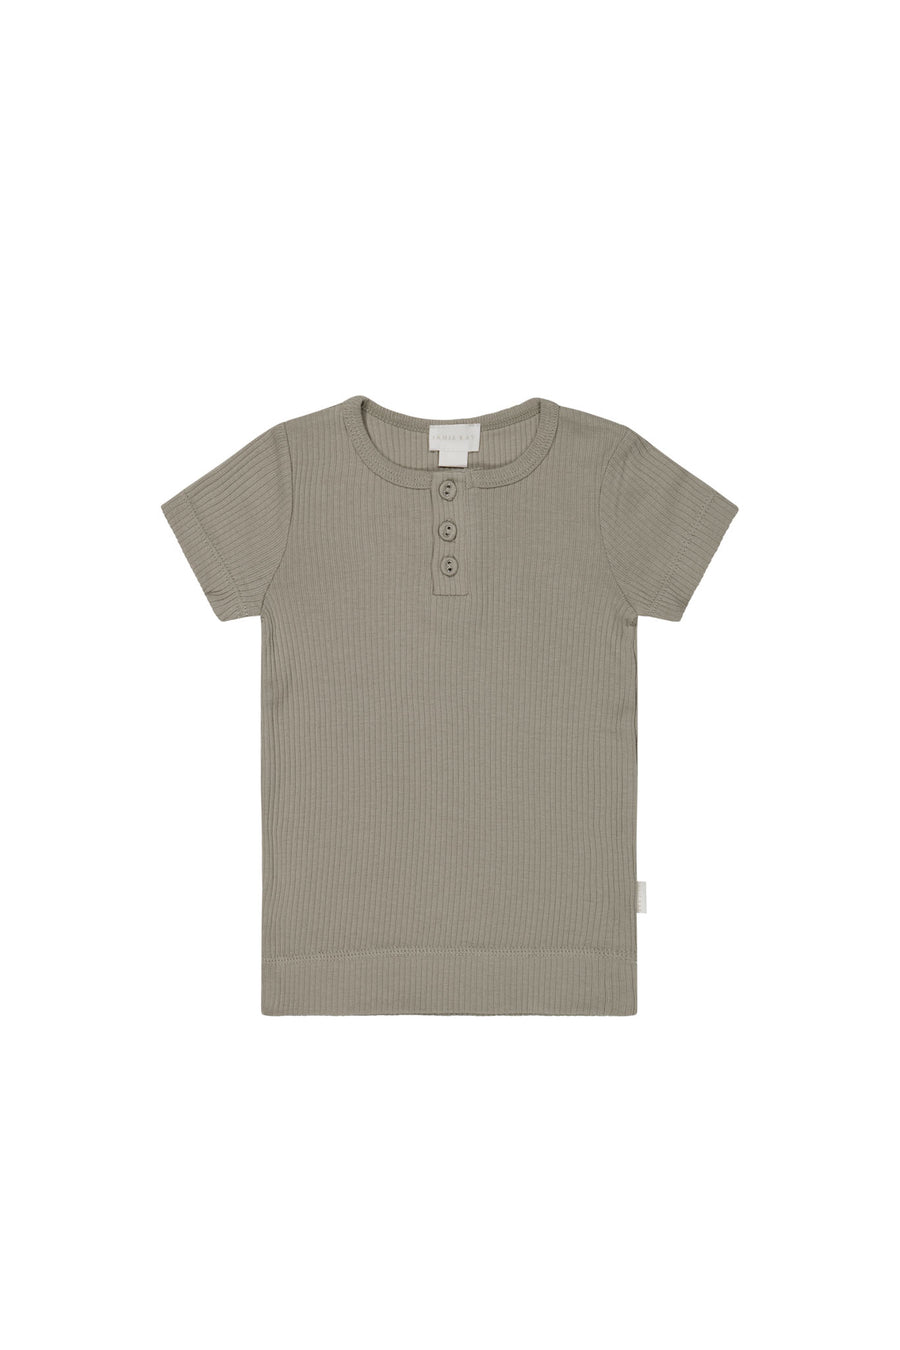 Organic Cotton Modal Henley Tee - Twig Childrens Top from Jamie Kay NZ